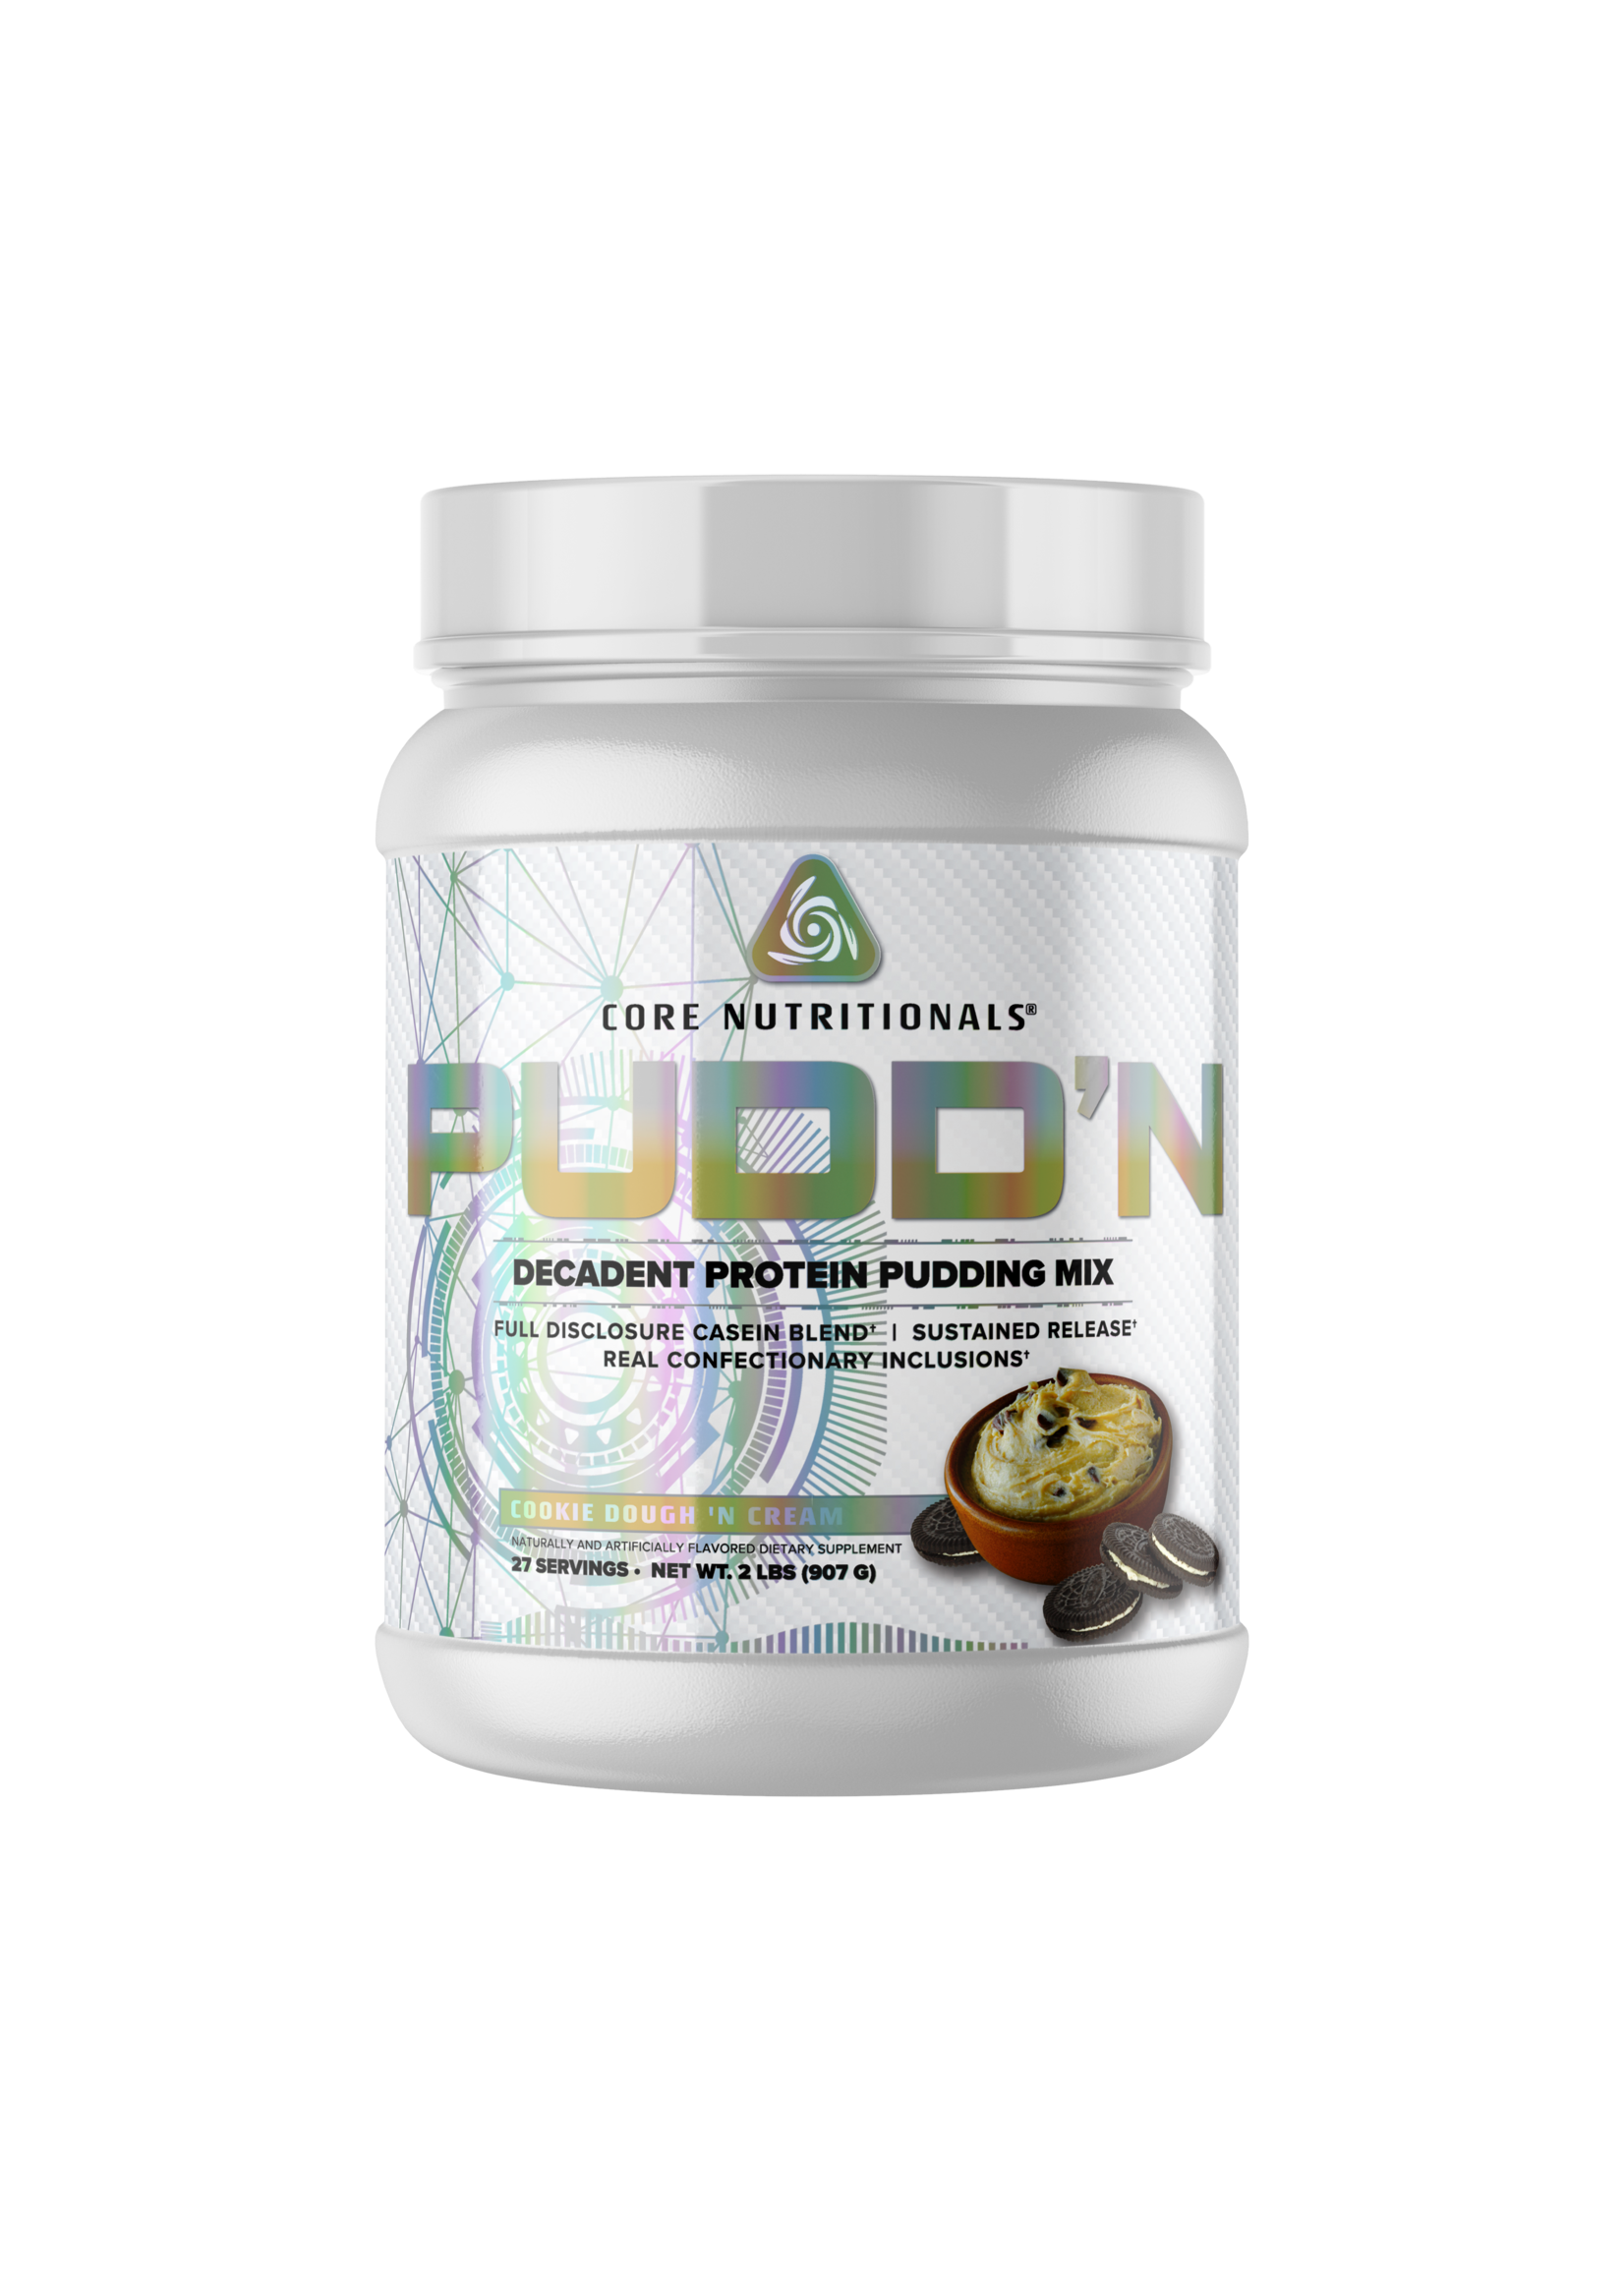 Core Nutritionals Core Pudd'n